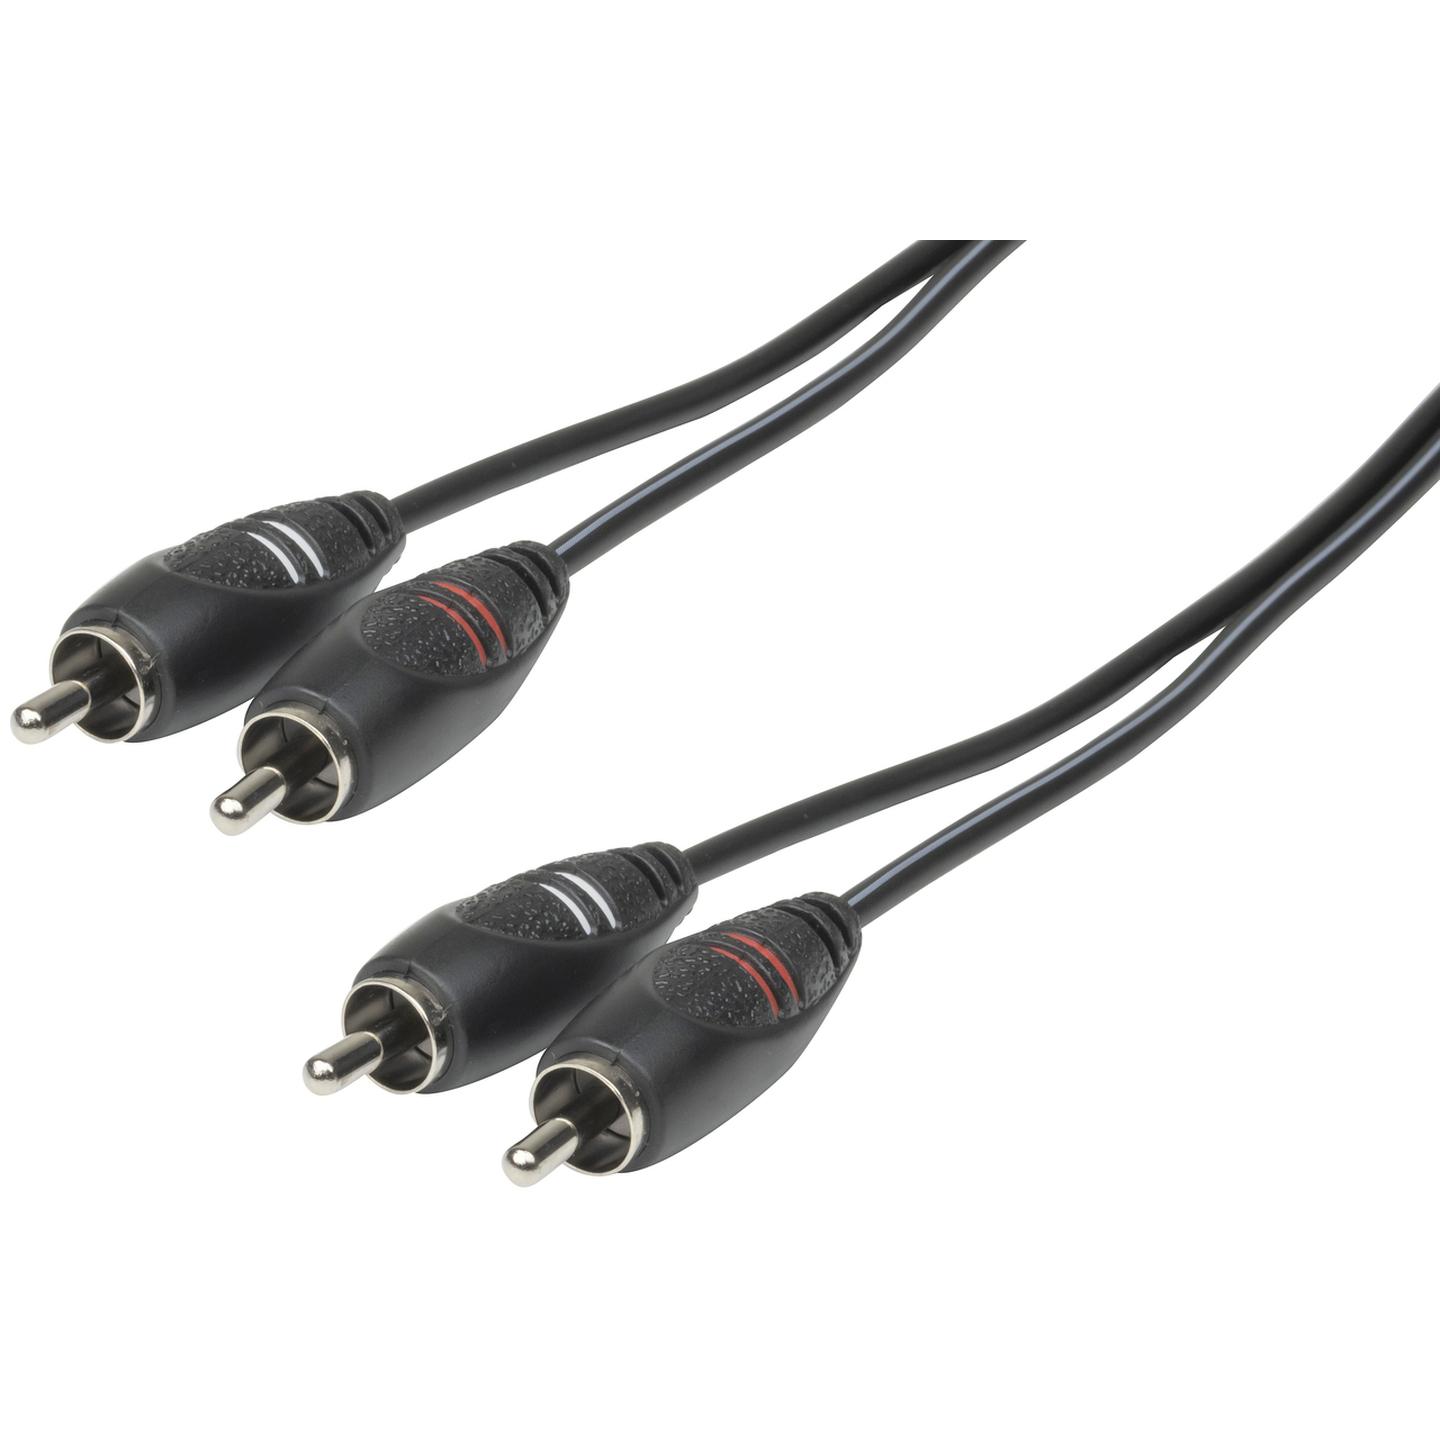 2 x RCA Plugs to 2 x RCA Plugs Audio Cable - 1.5m